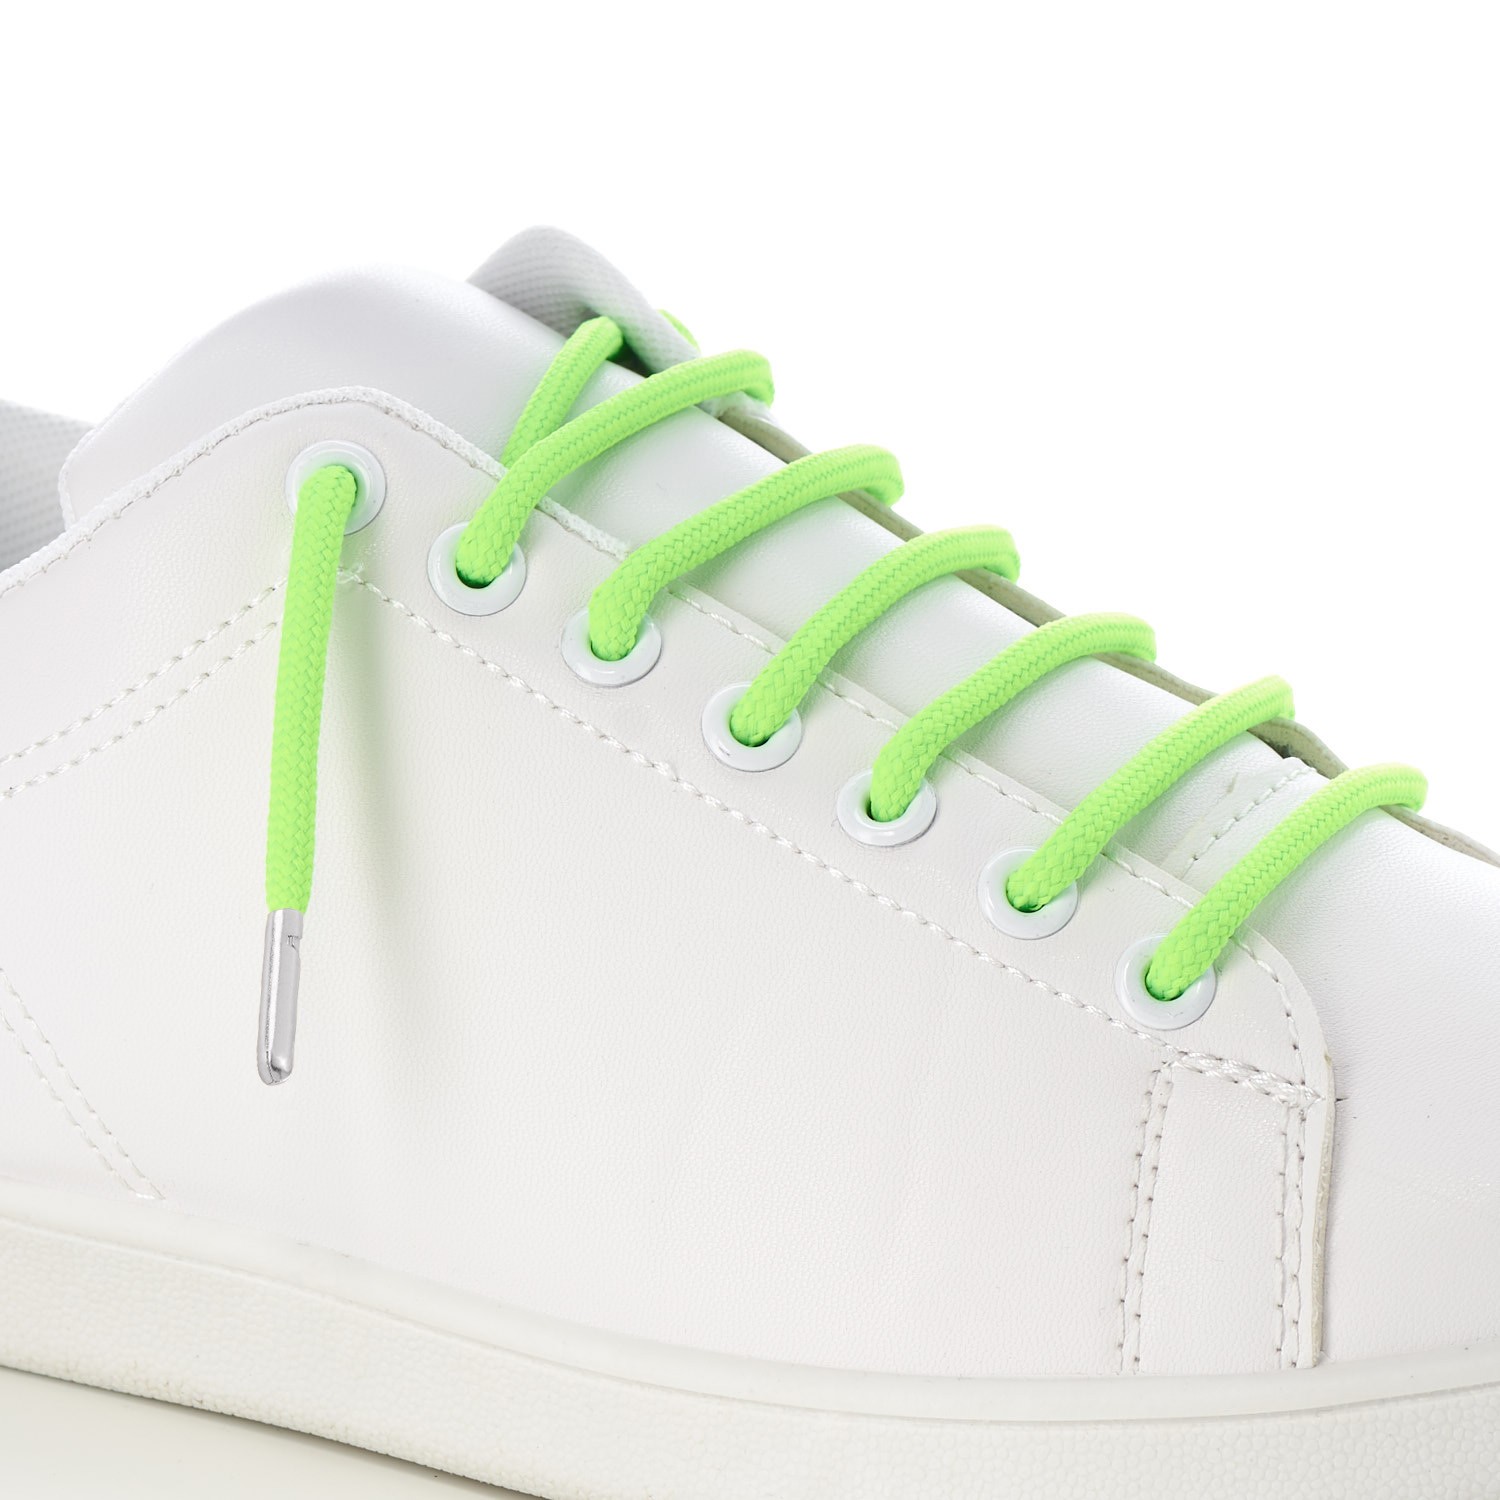 T621 5mm Round Polyester Shoe Laces Fluorescent Lime 4 Silver Metal Tip Kalsi Cords